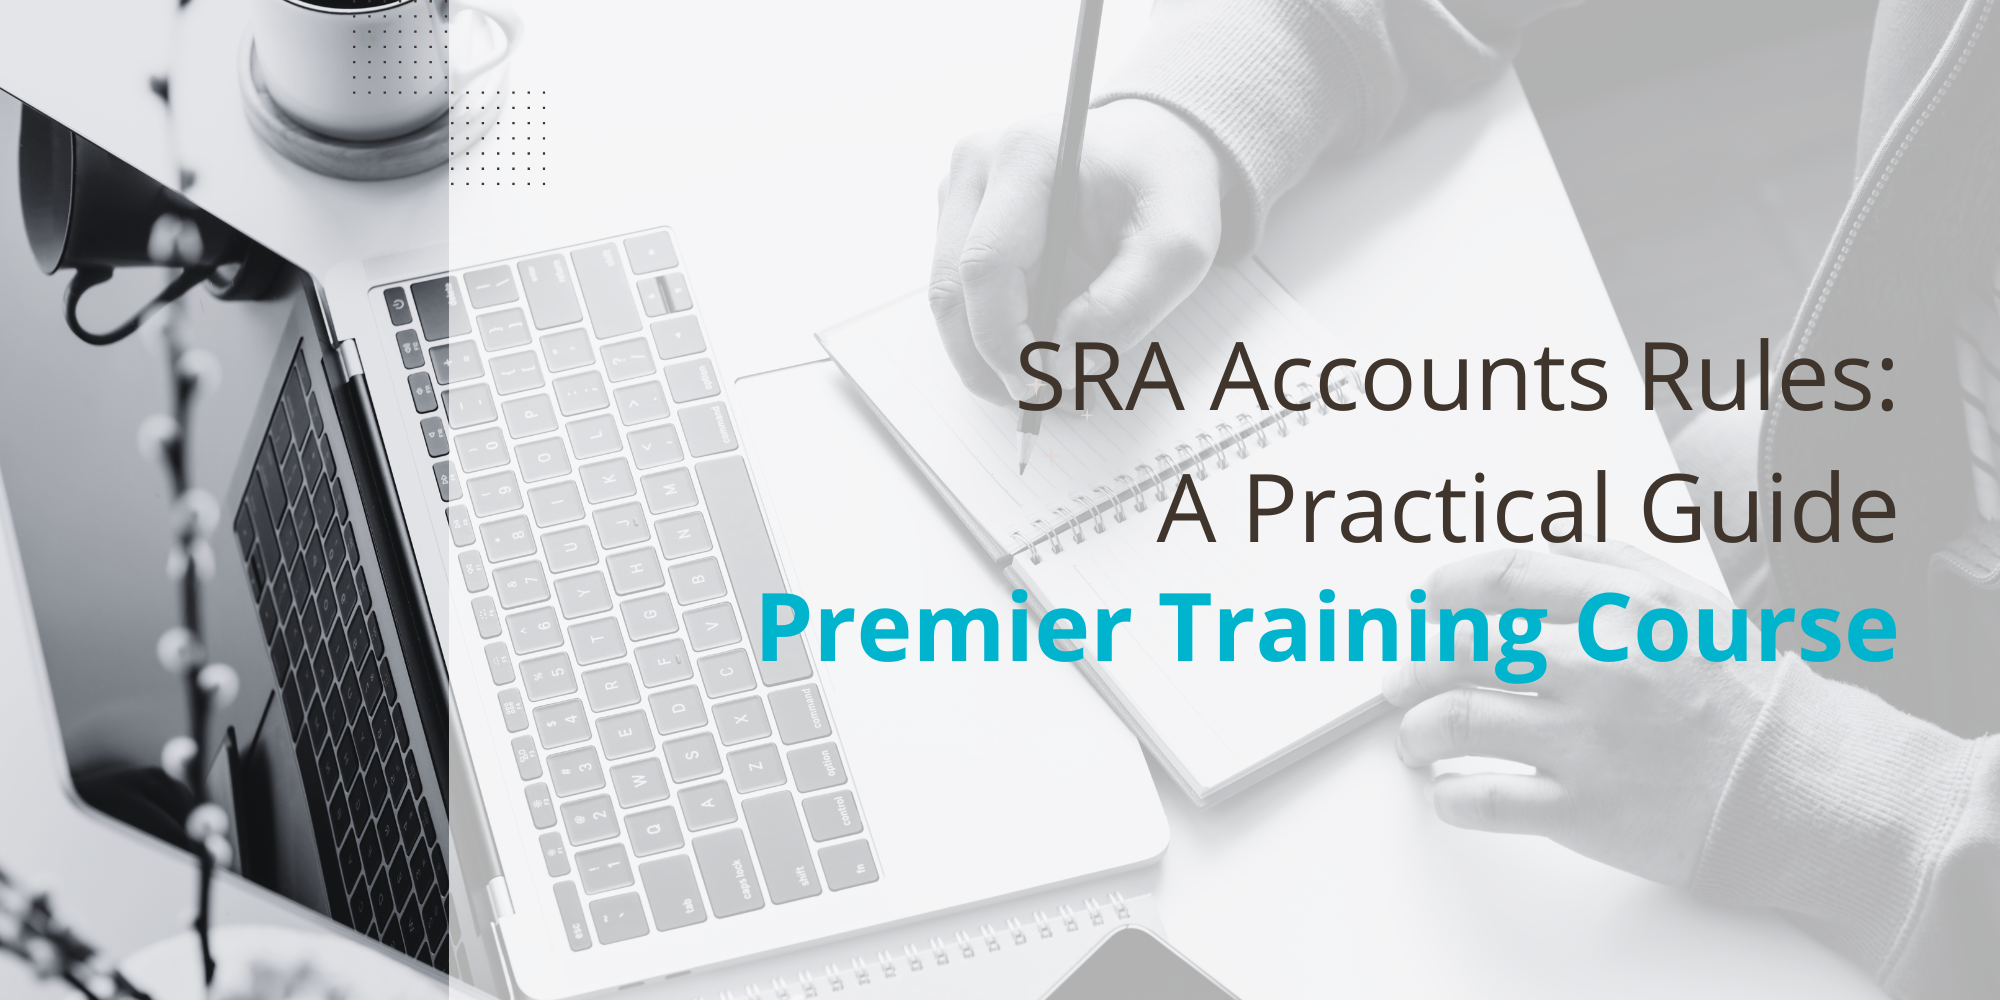 SRA Accounts Rules: A Practical Guide